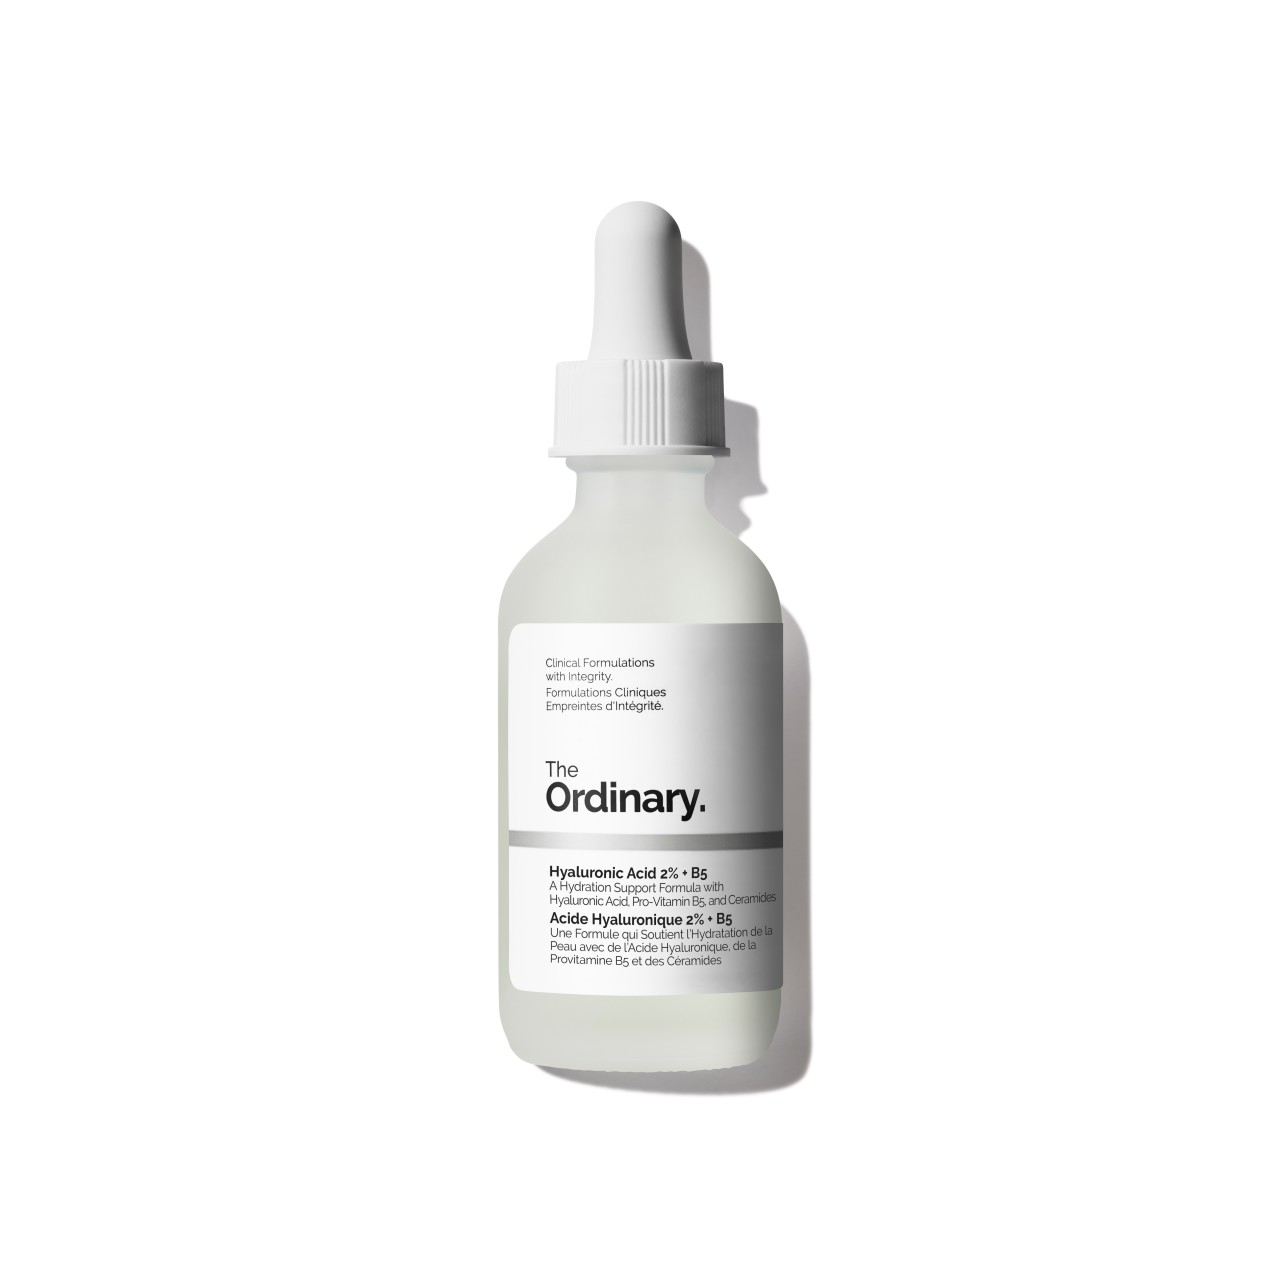 The Ordinary - Hyaluronic Acid 2 -  30ml